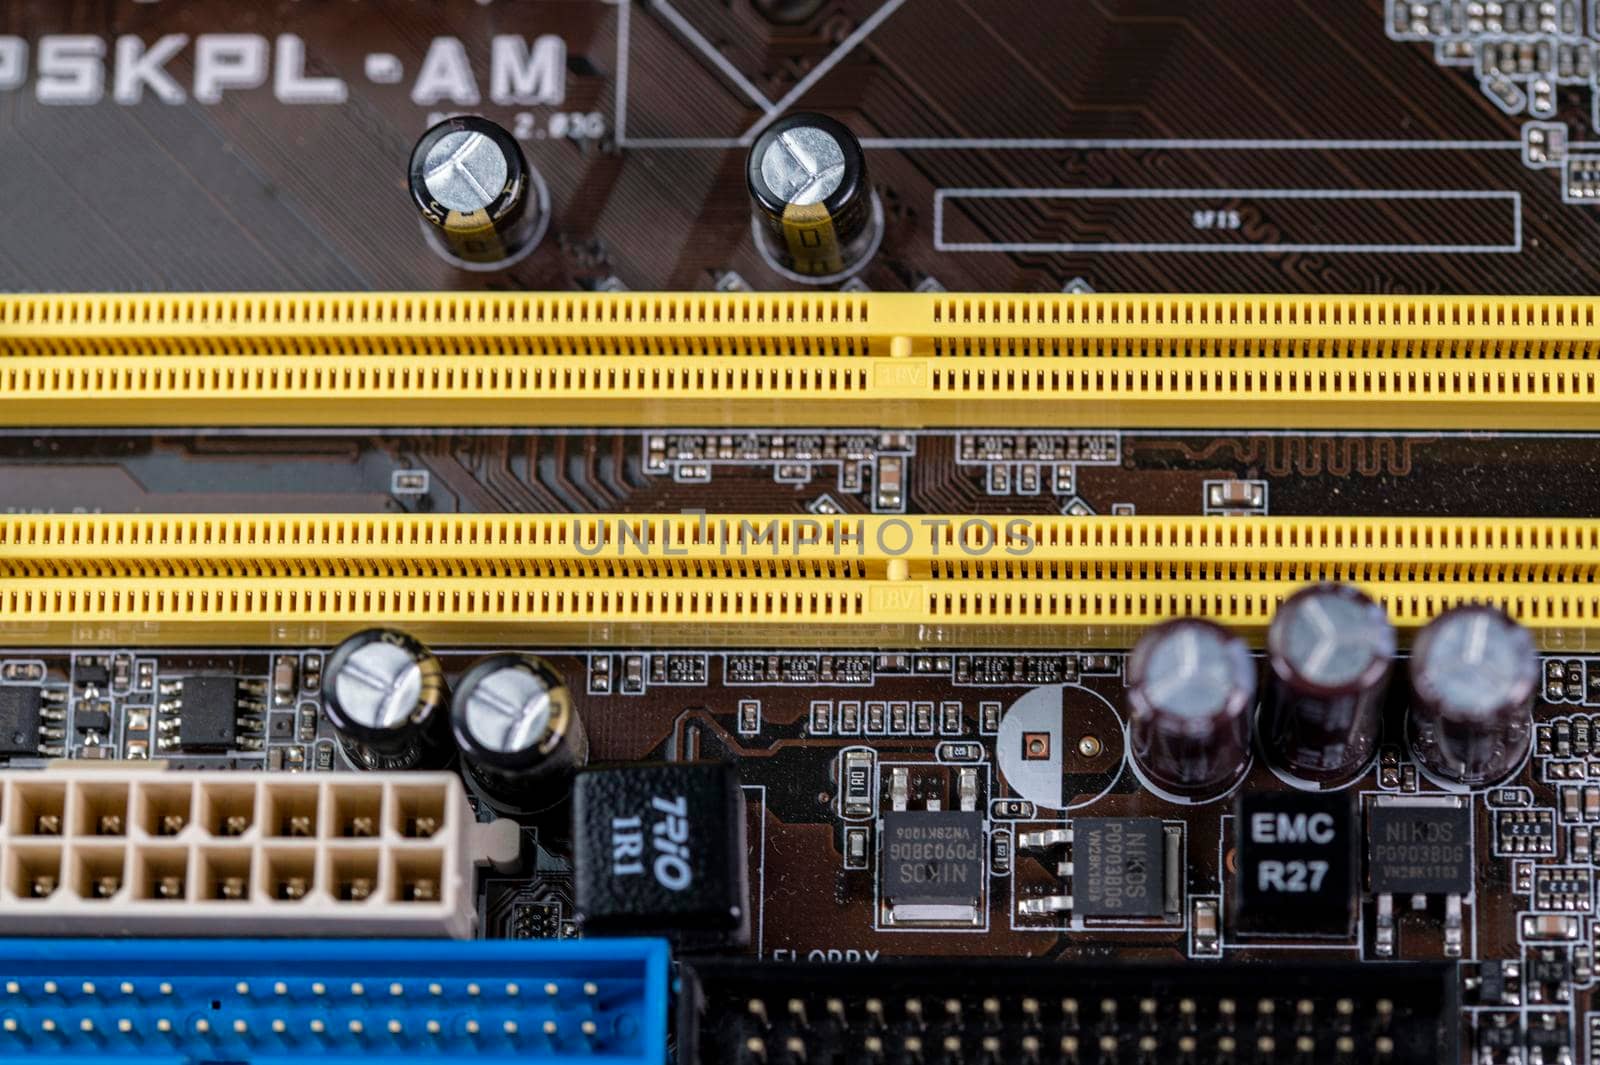 detail of a motherboard with connectors and heatsinks of a fixed computer